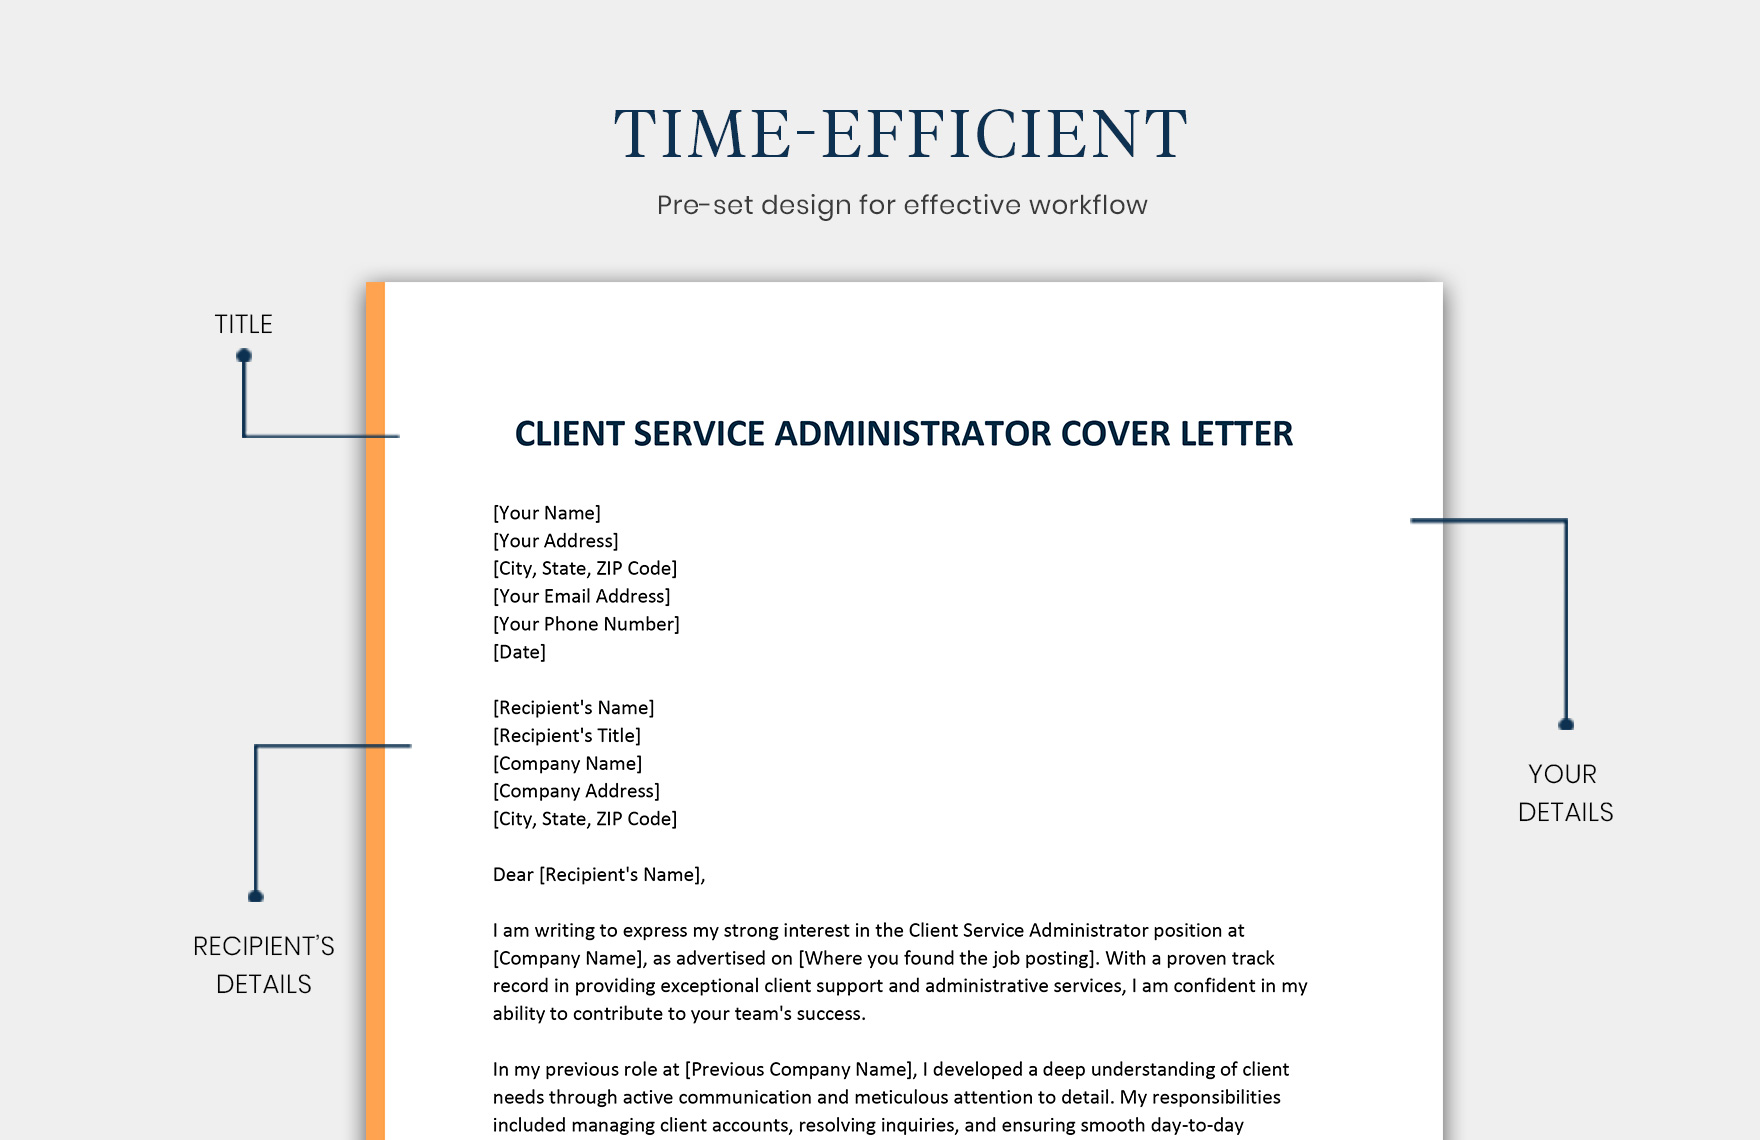 Client Service Administrator Cover Letter